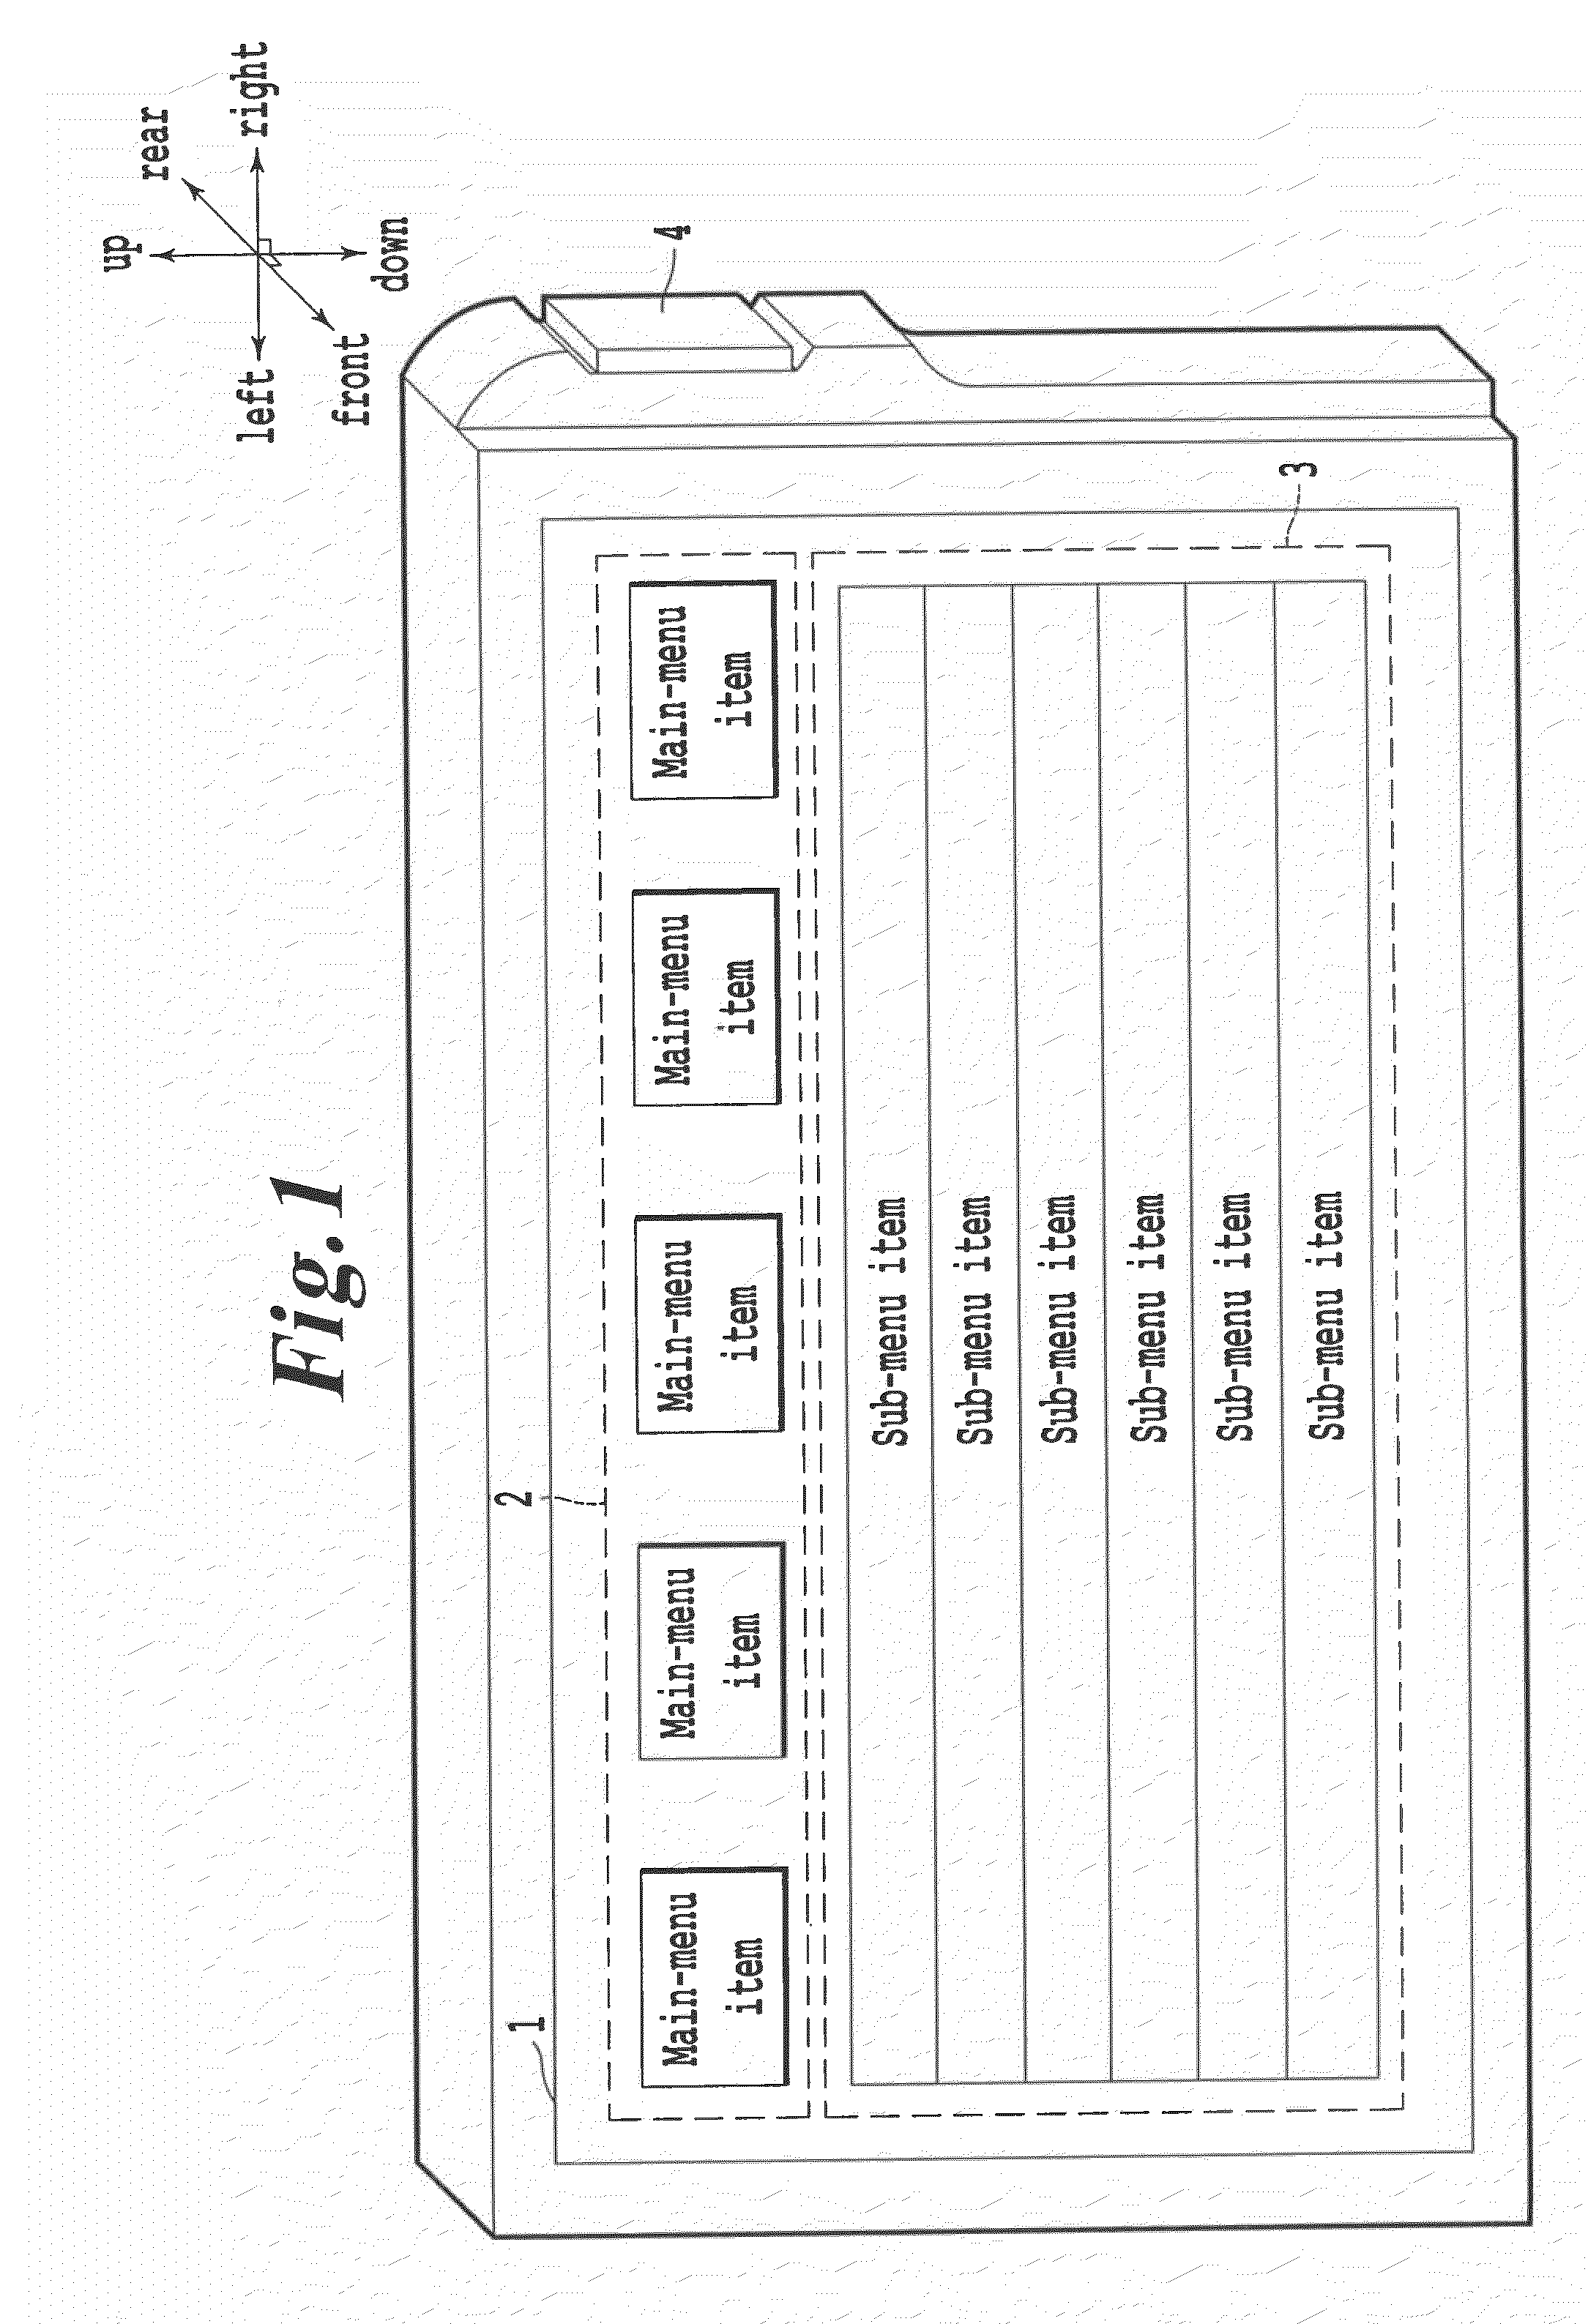 Electronic apparatus with display screen